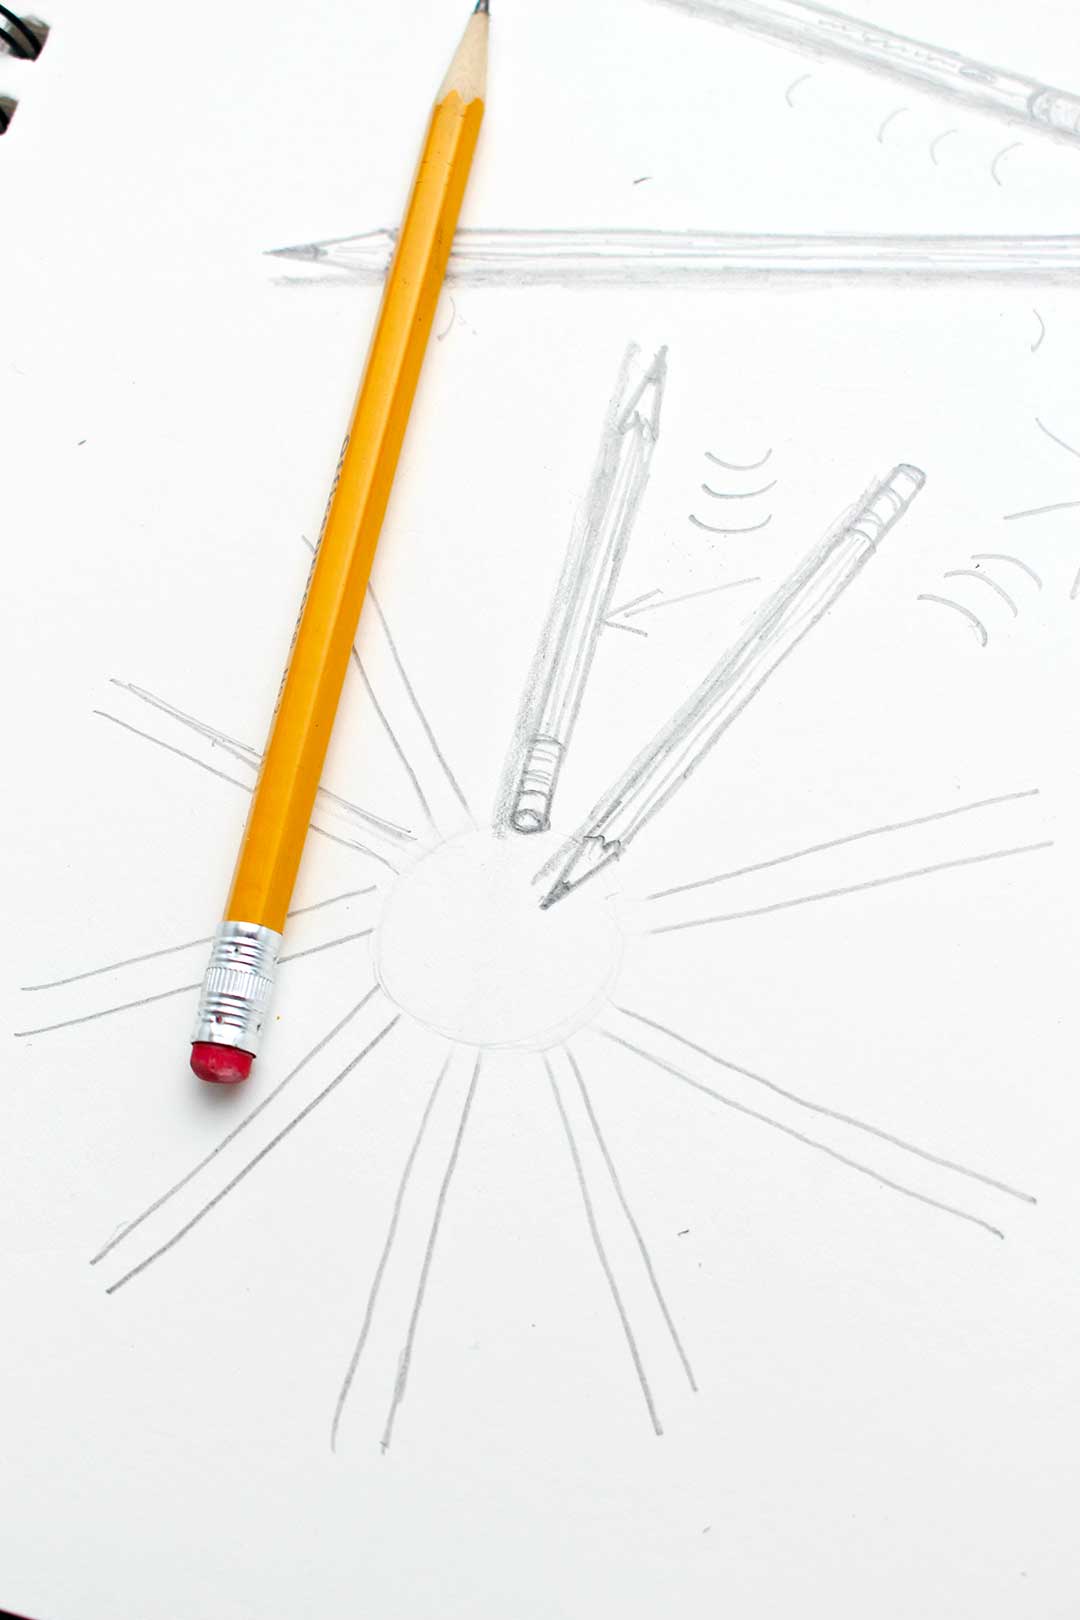 Close up view of pencils drawn in different angles and directions.